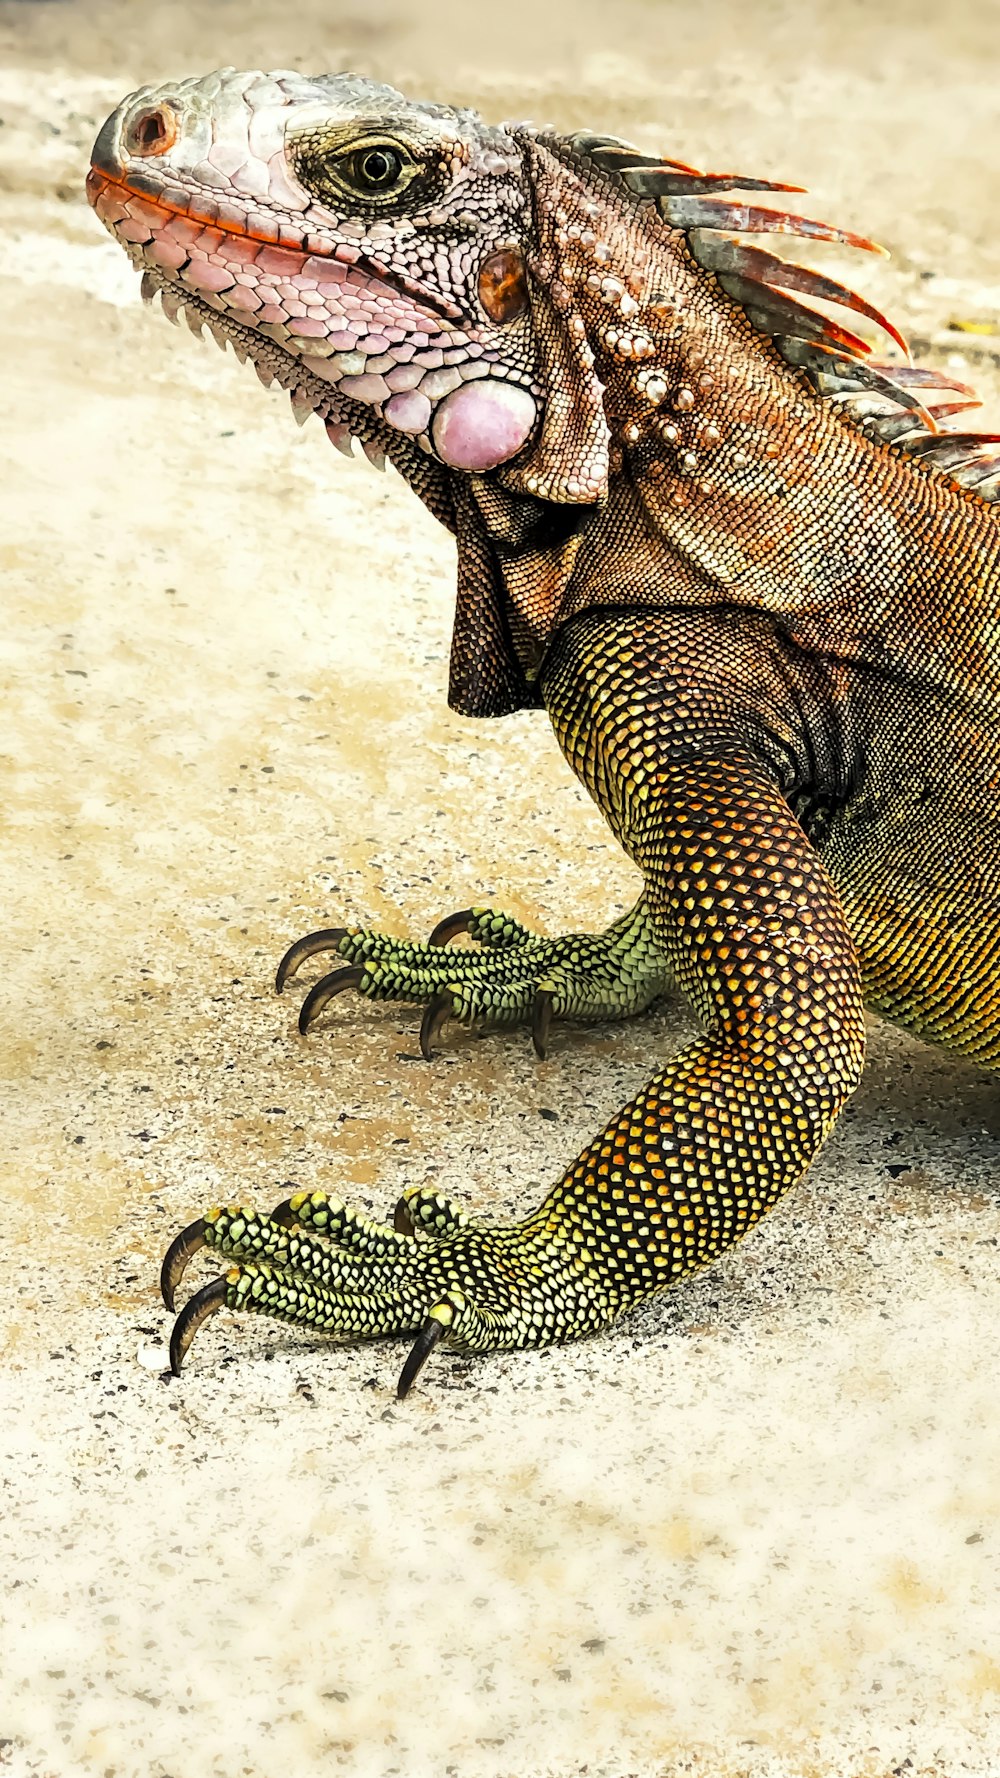 green and black reptile on white sand